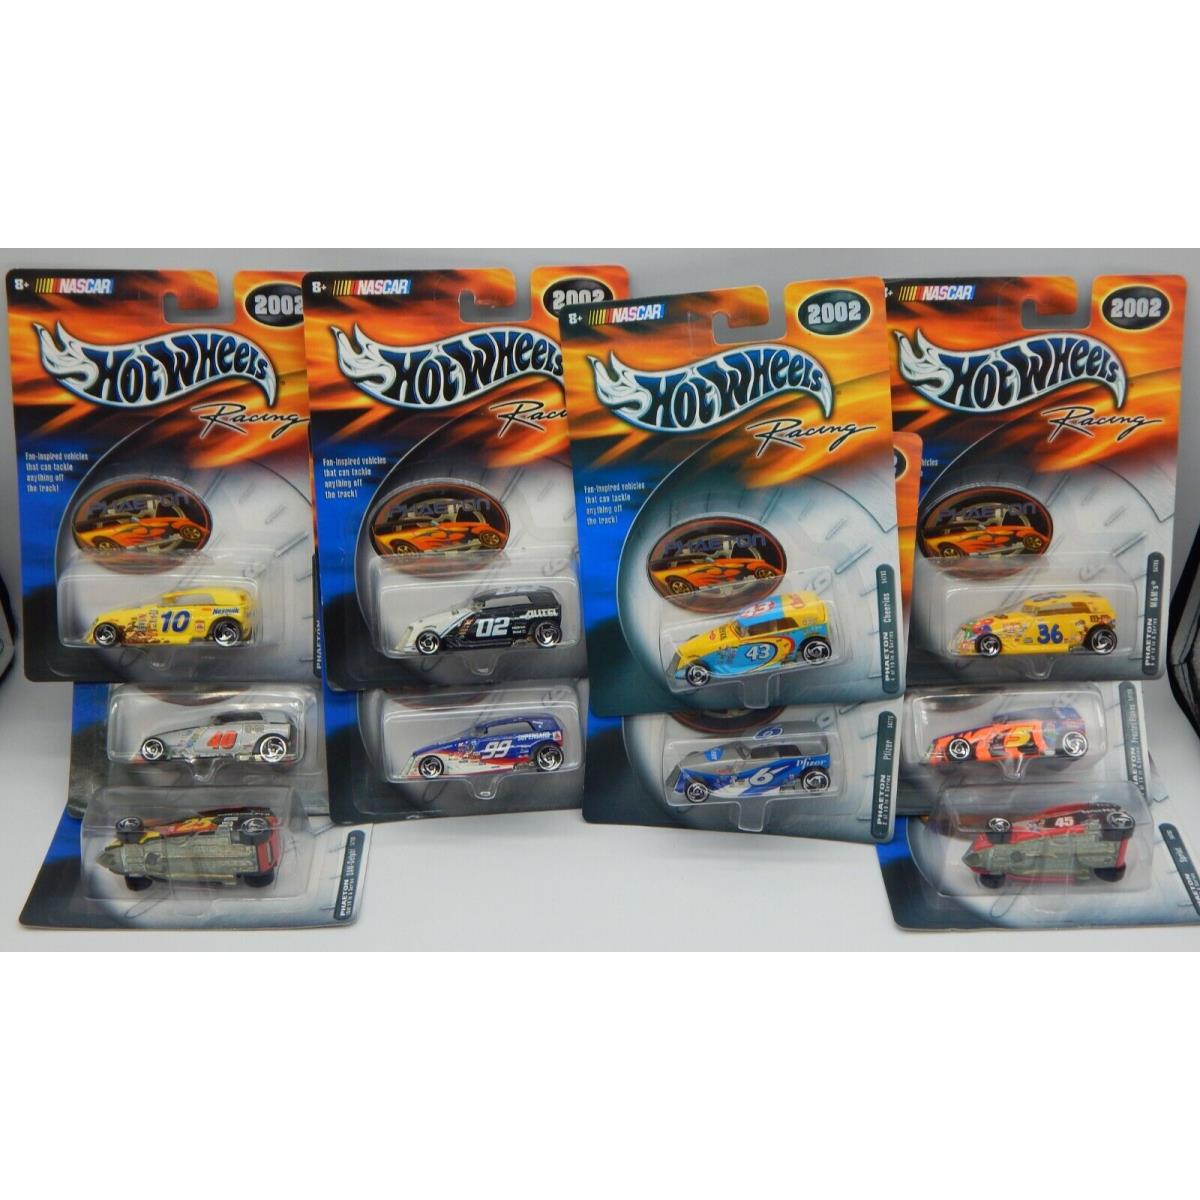 1:64th 2002 Hot Wheels Racing Full Collection OF 10 Phaeton Cars - RTC1697